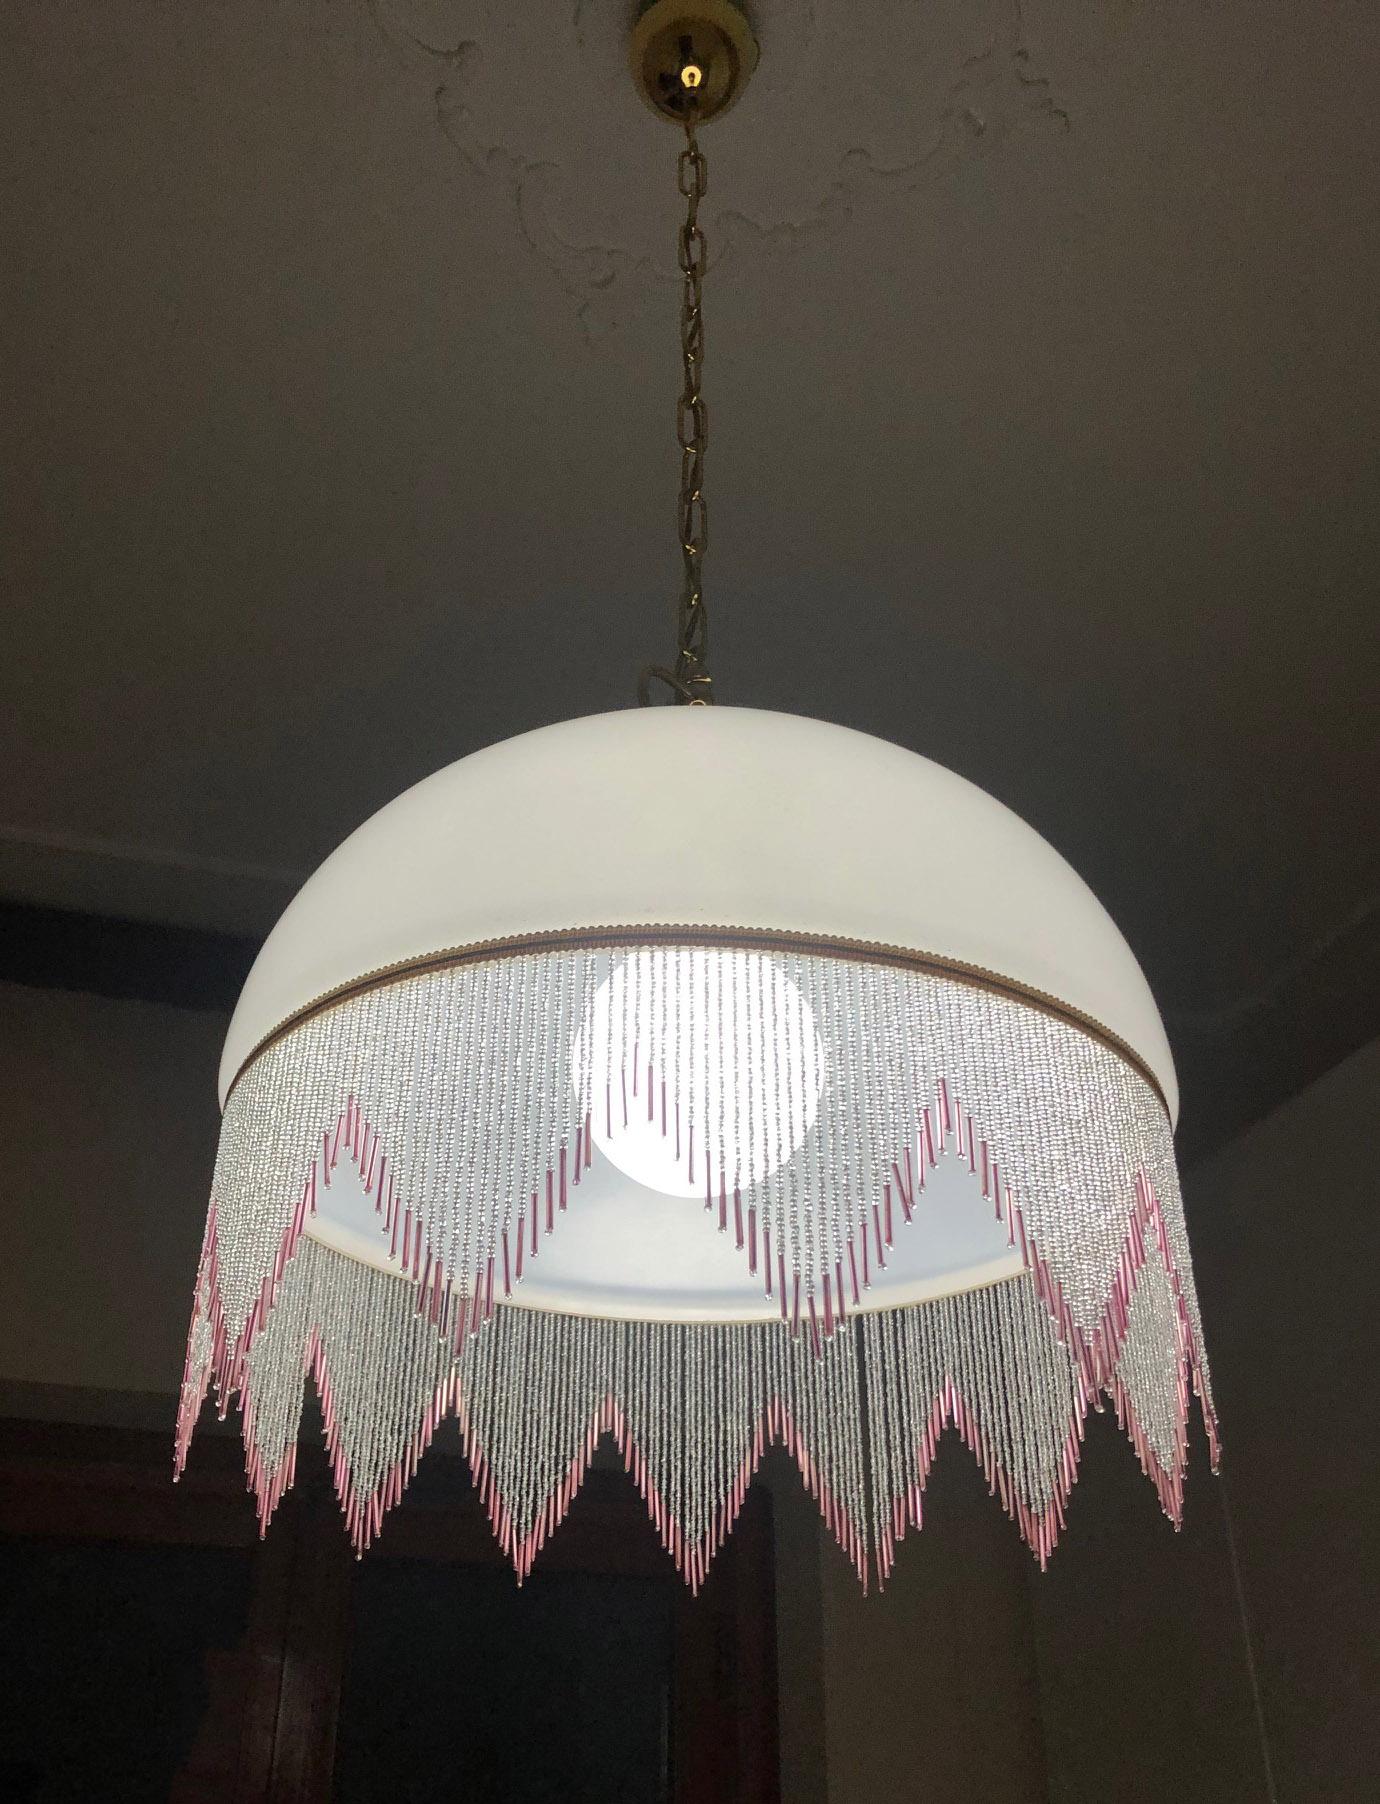 1980s glass chandelier in satin white color, with one light, special pink hanging decorations
Size cm.: 45 diameter, height 105.